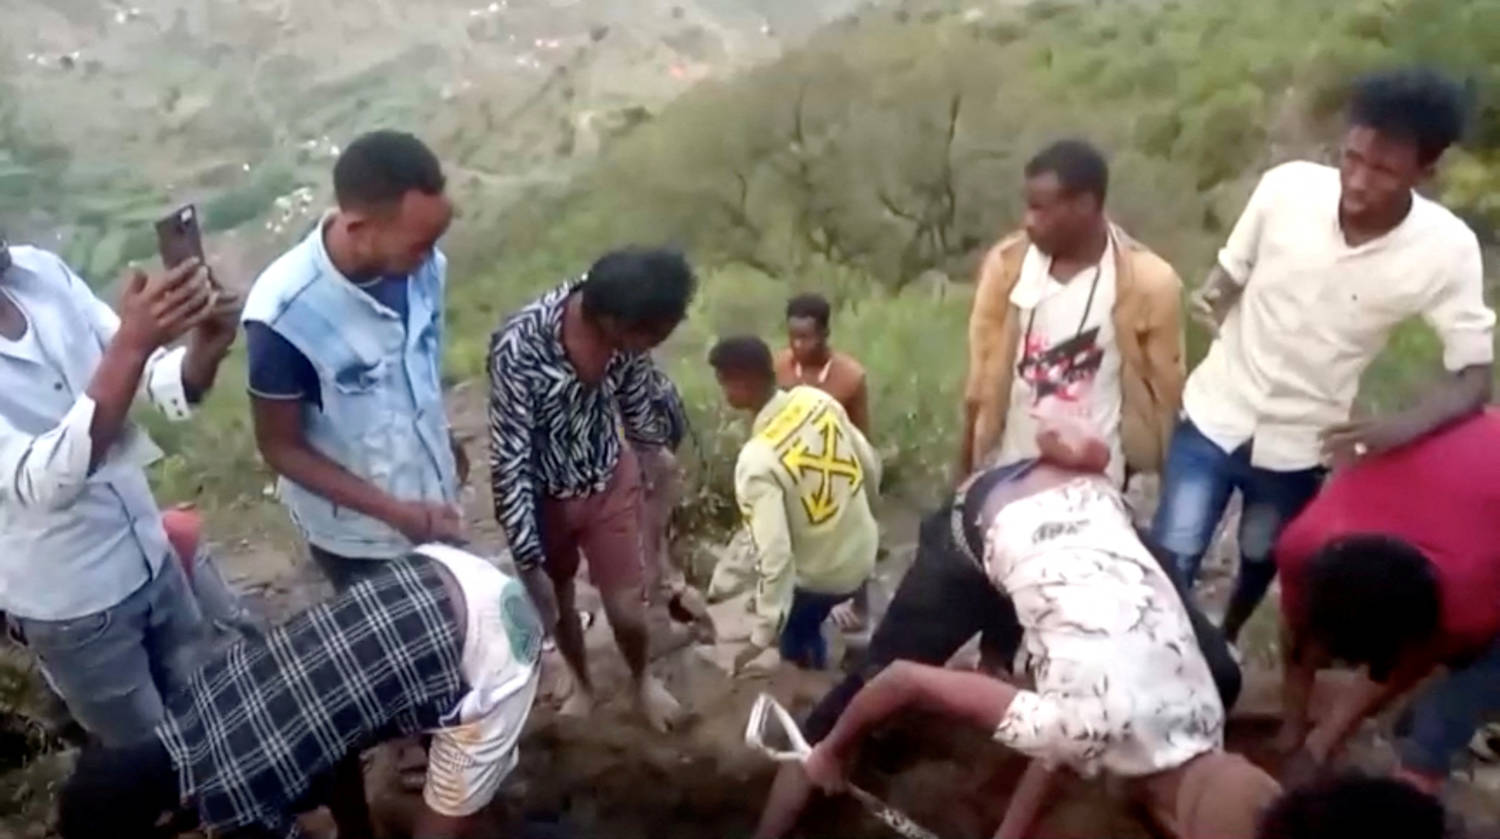 Migrants Dig A Grave Near The Trail From Al Thabit Into Saudi Arabia, On The Yemen Side